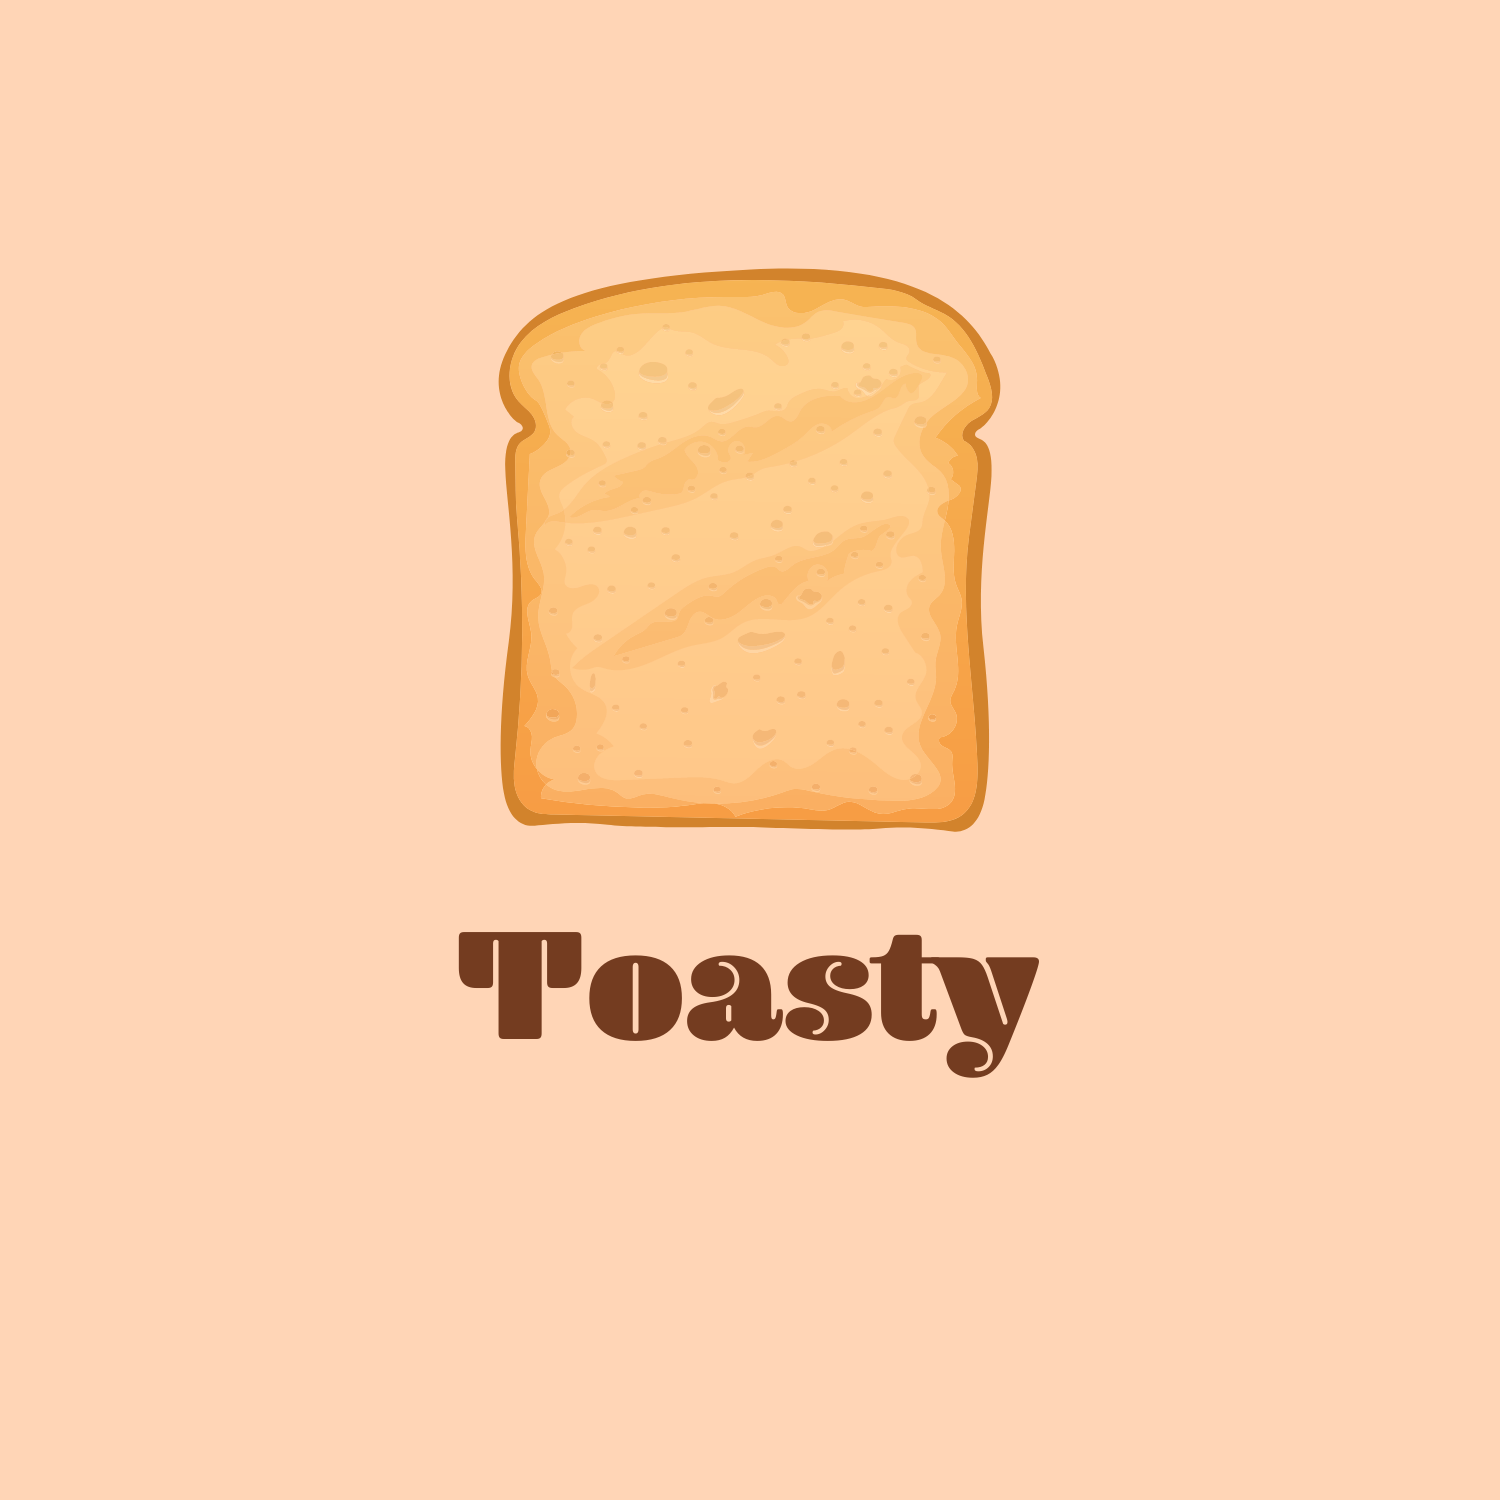 oktoasty's Profile Picture on PvPRP